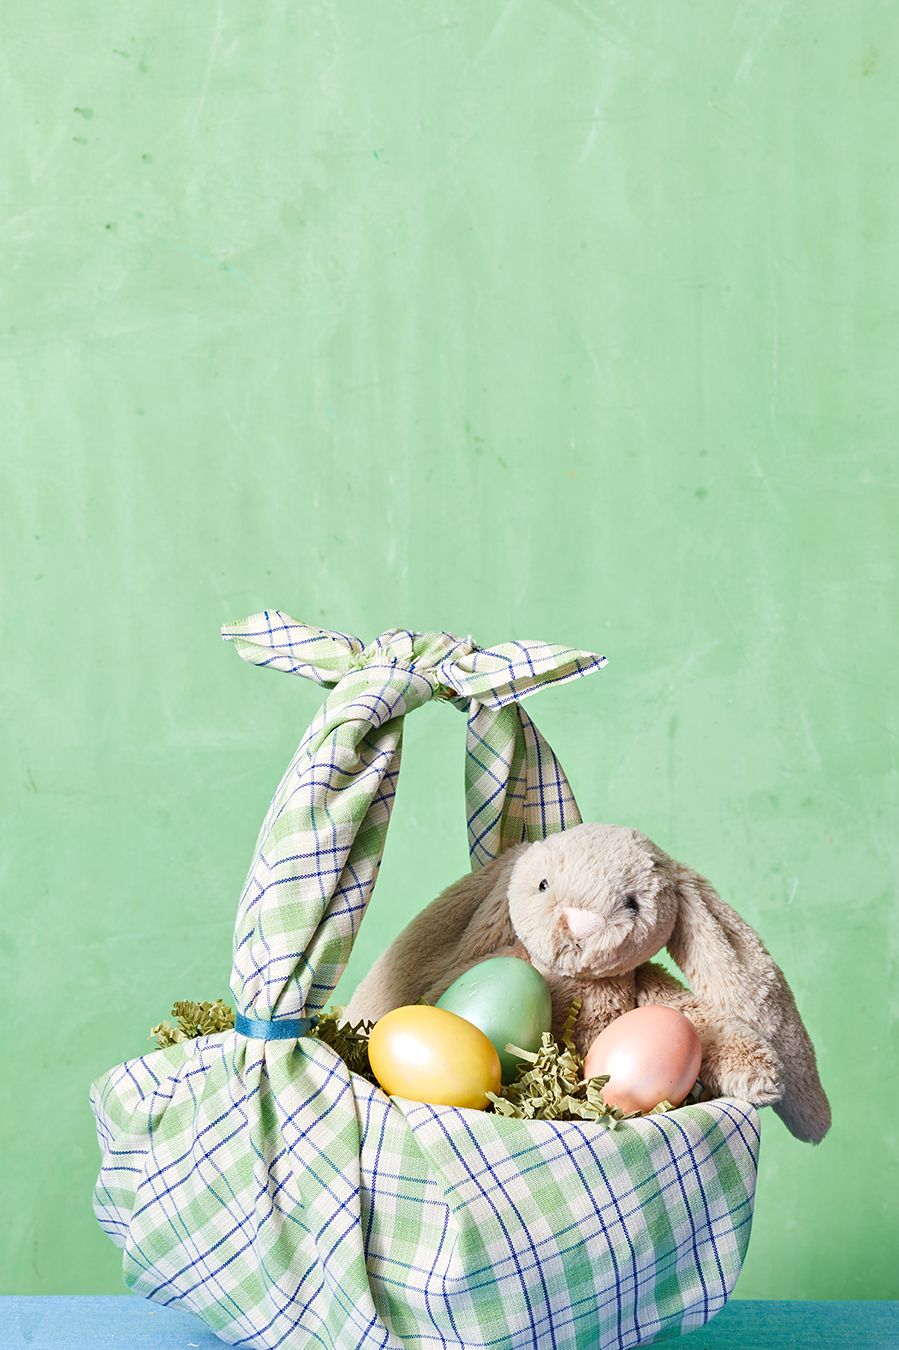 Our DIY Bunny Lovey Makes the Perfect Handmade Gift - Project Nursery